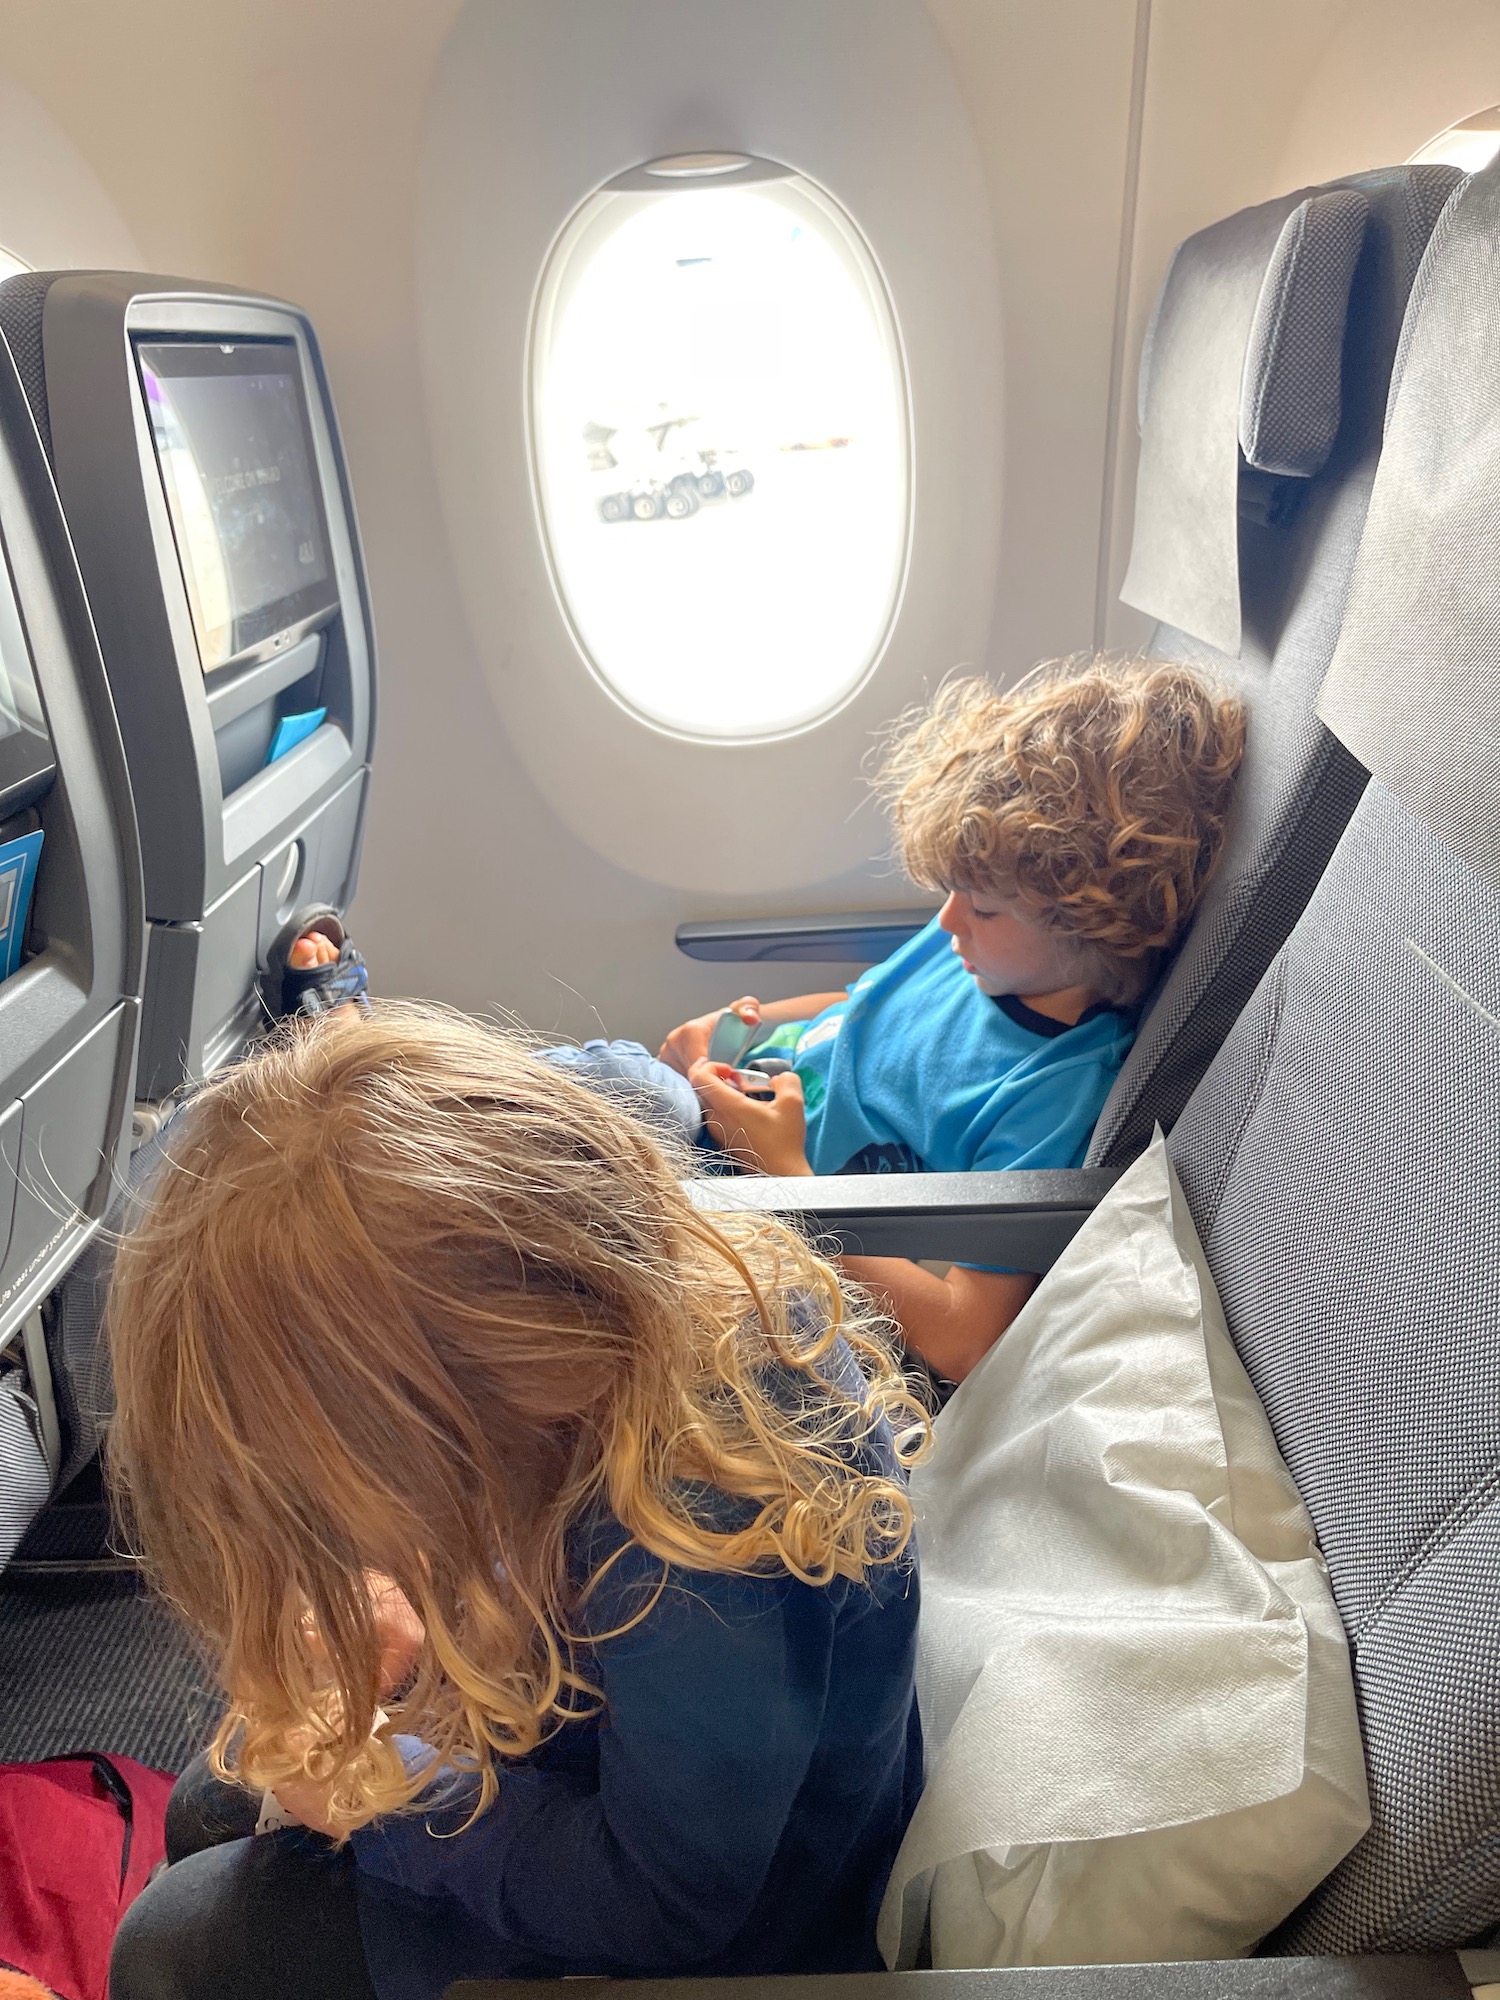 a boy and girl sitting in an airplane